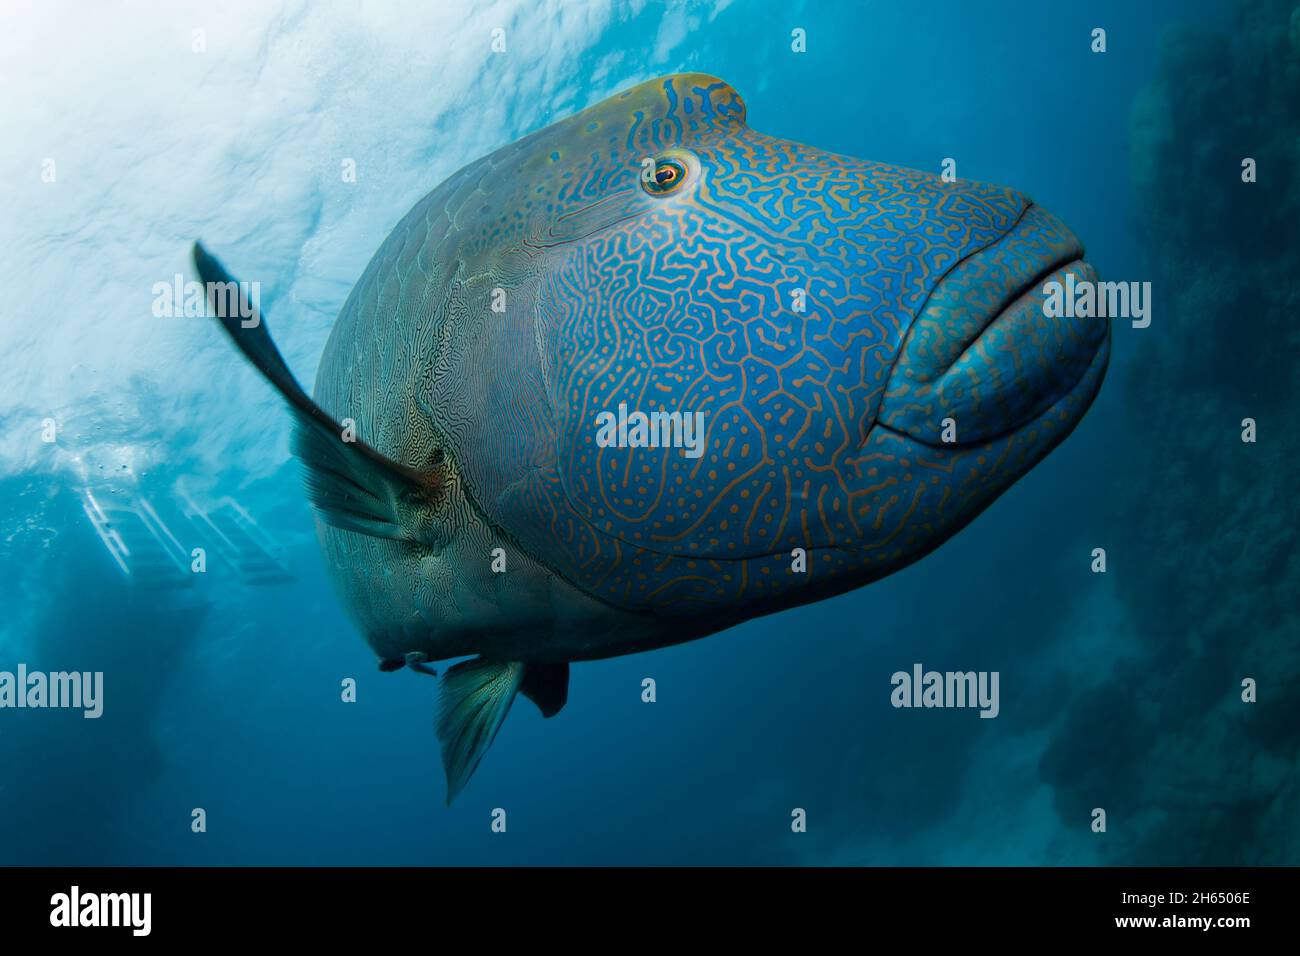 A large blue Hump-Headed Maori Wrasse fish with gold or yellowish strip pattern swimming in the ocean looking and waving to the camera, the Great Barr Stock Photo